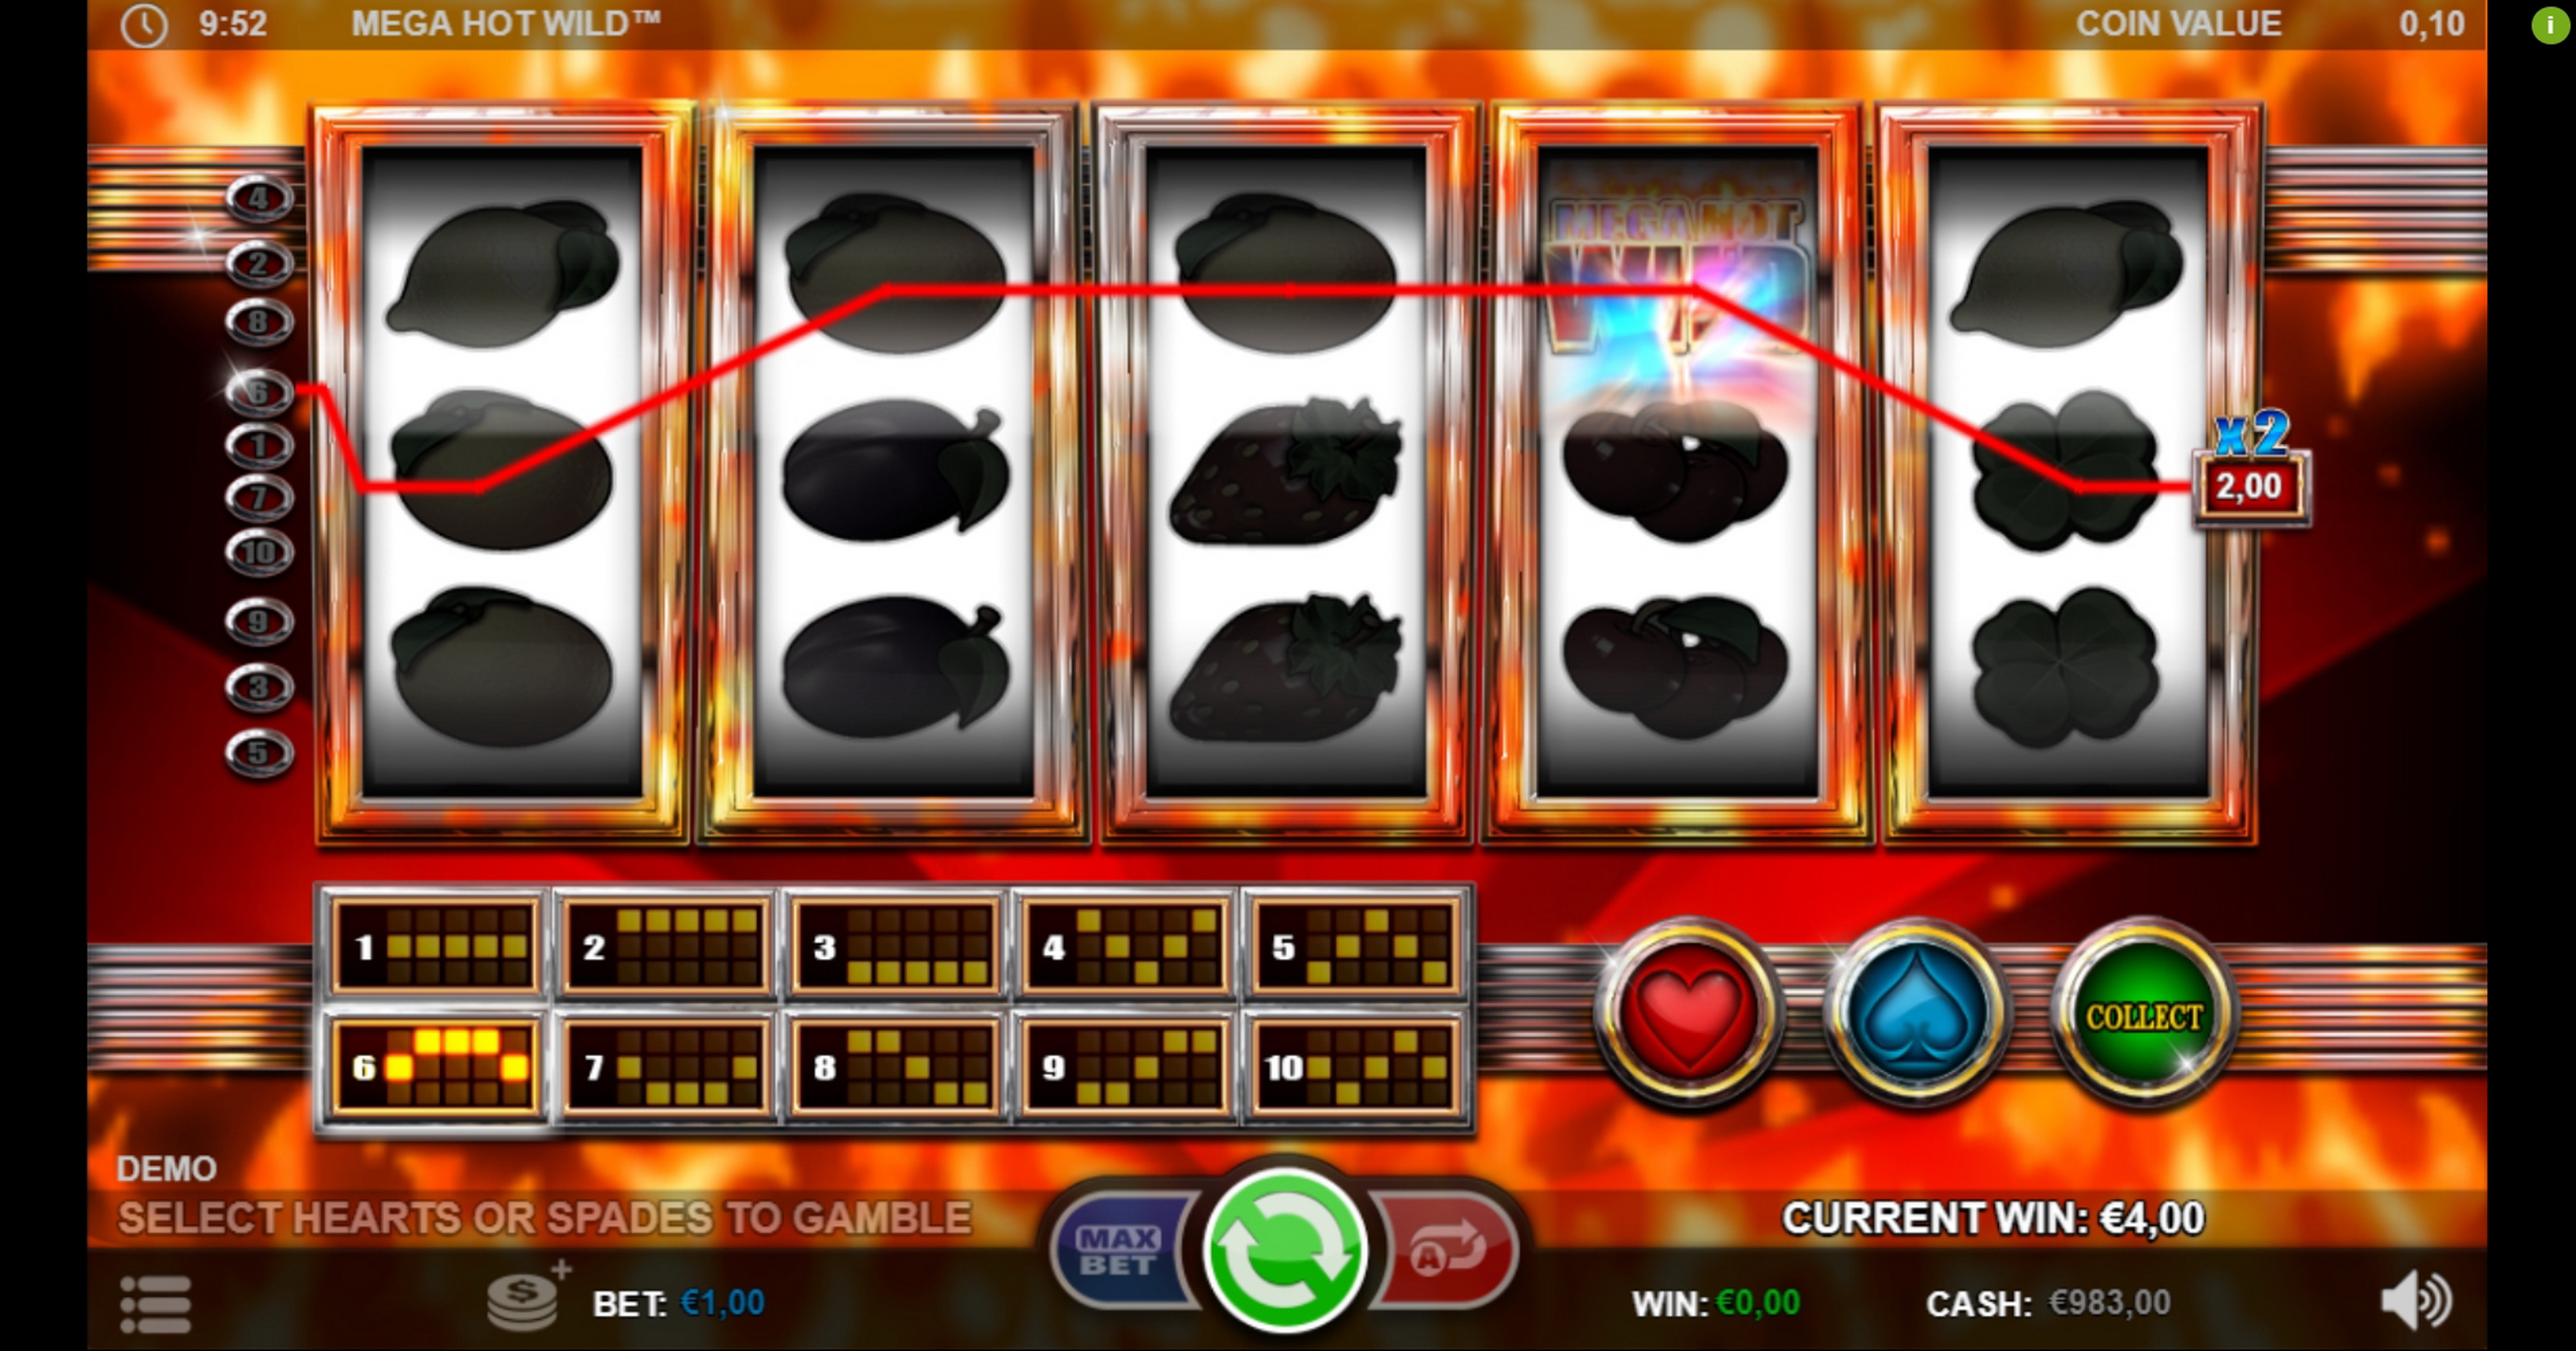 Win Money in Mega Hot Wild Free Slot Game by Betsson Group